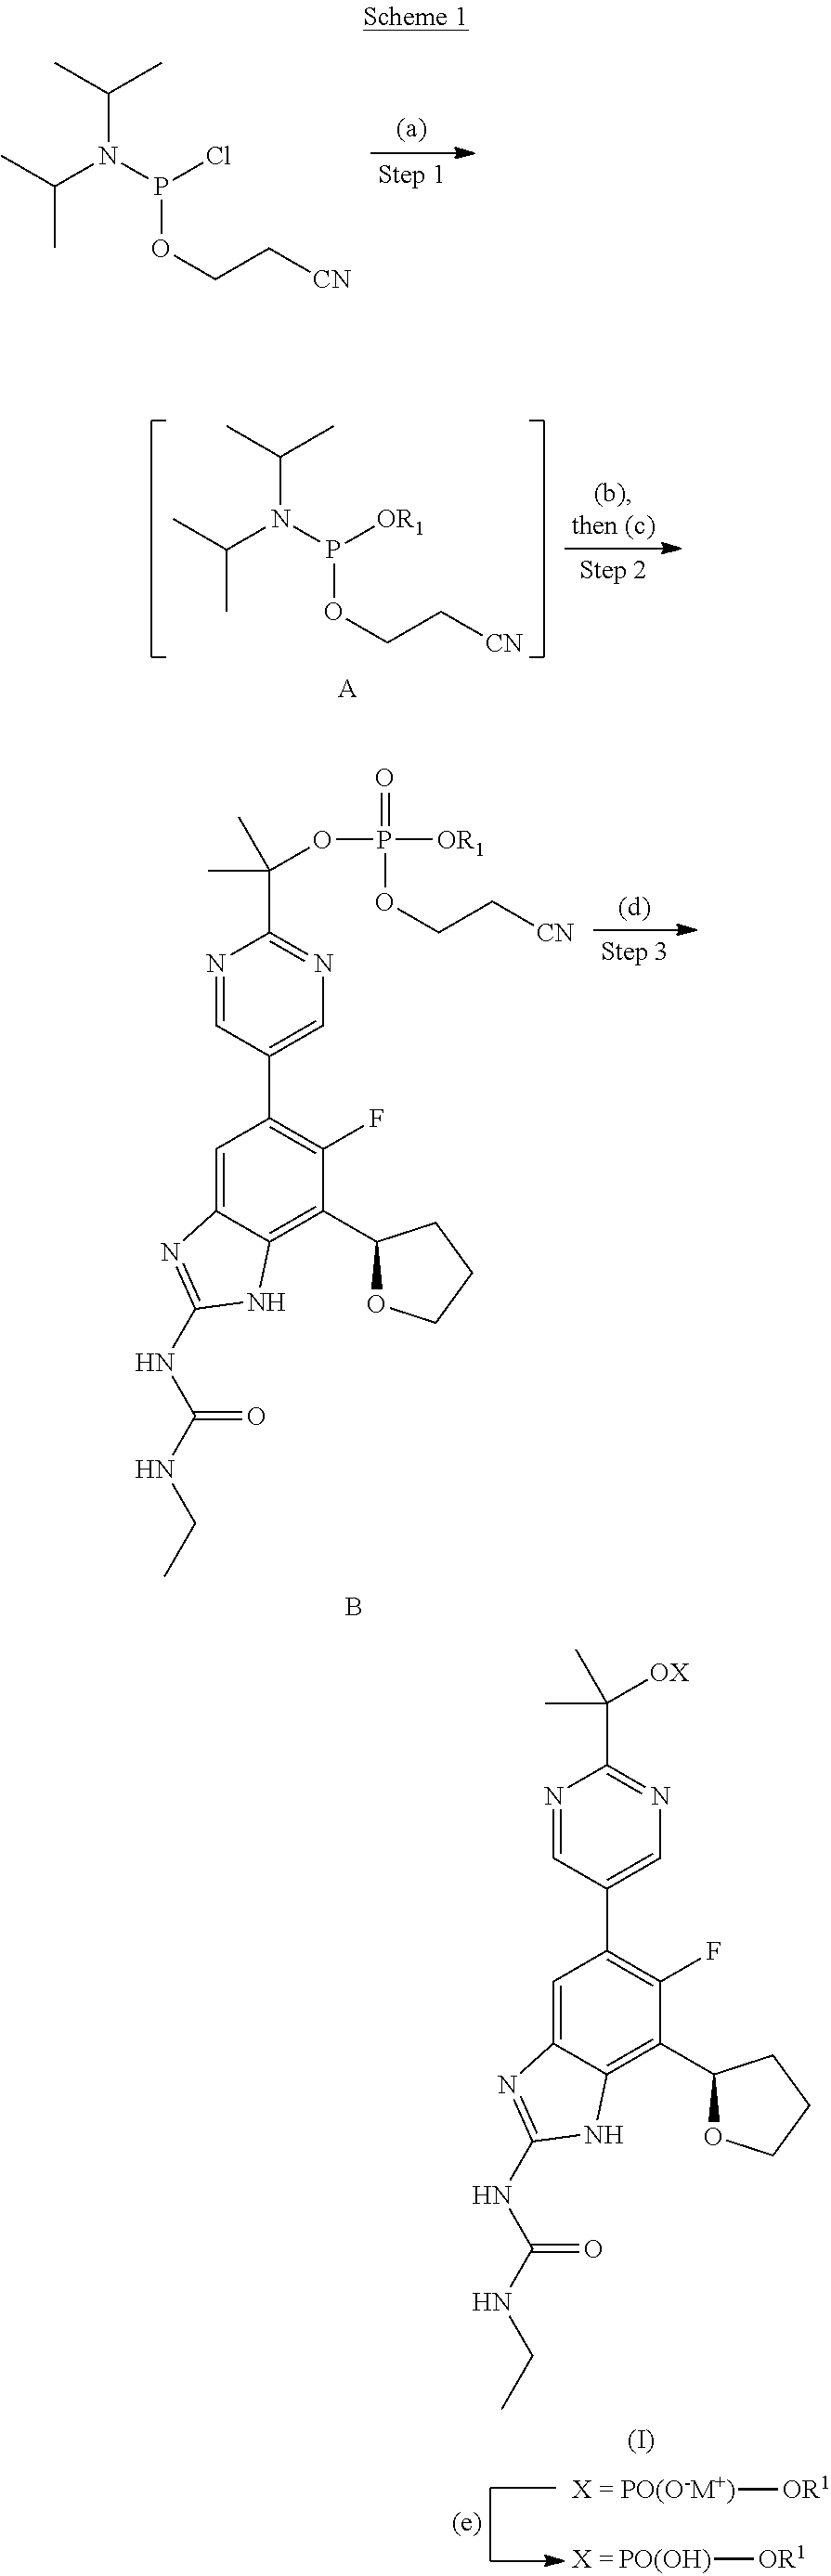 Phosphate esters of gyrase and topoisomerase inhibitors